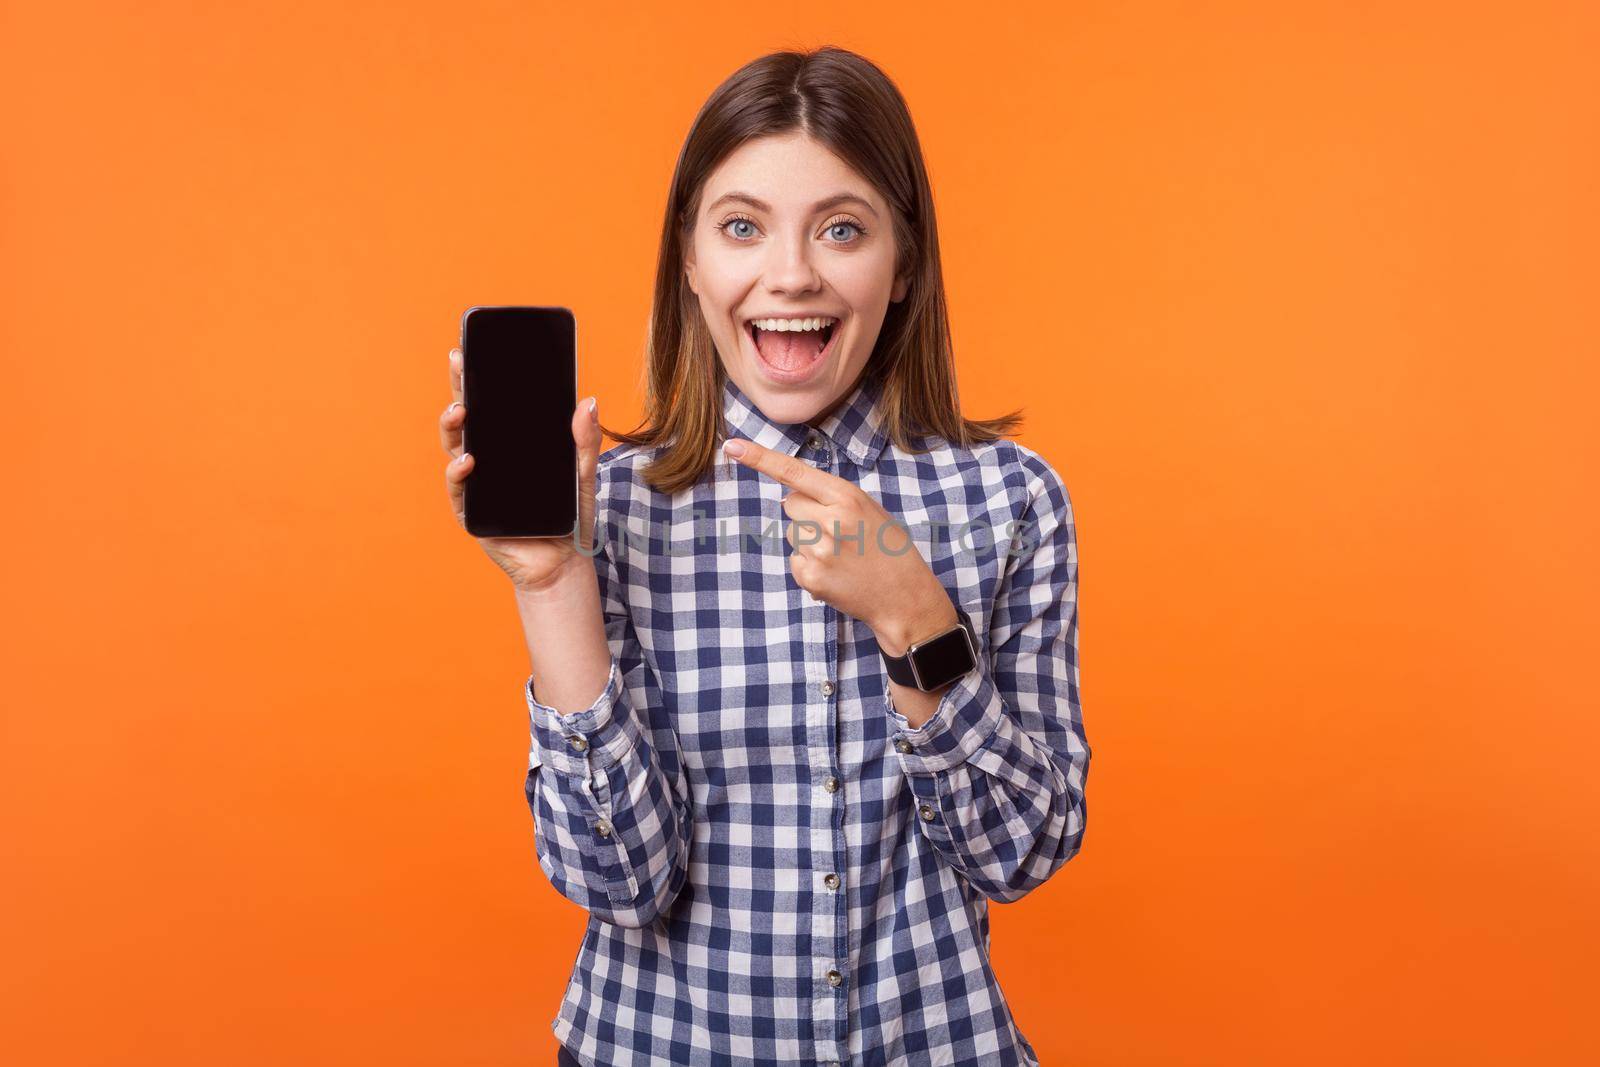 Portrait of shocked attractive brunette woman with charming smile wearing checkered shirt standing pointing at phone, amazed and wow facial expression. indoor studio shot isolated on orange background